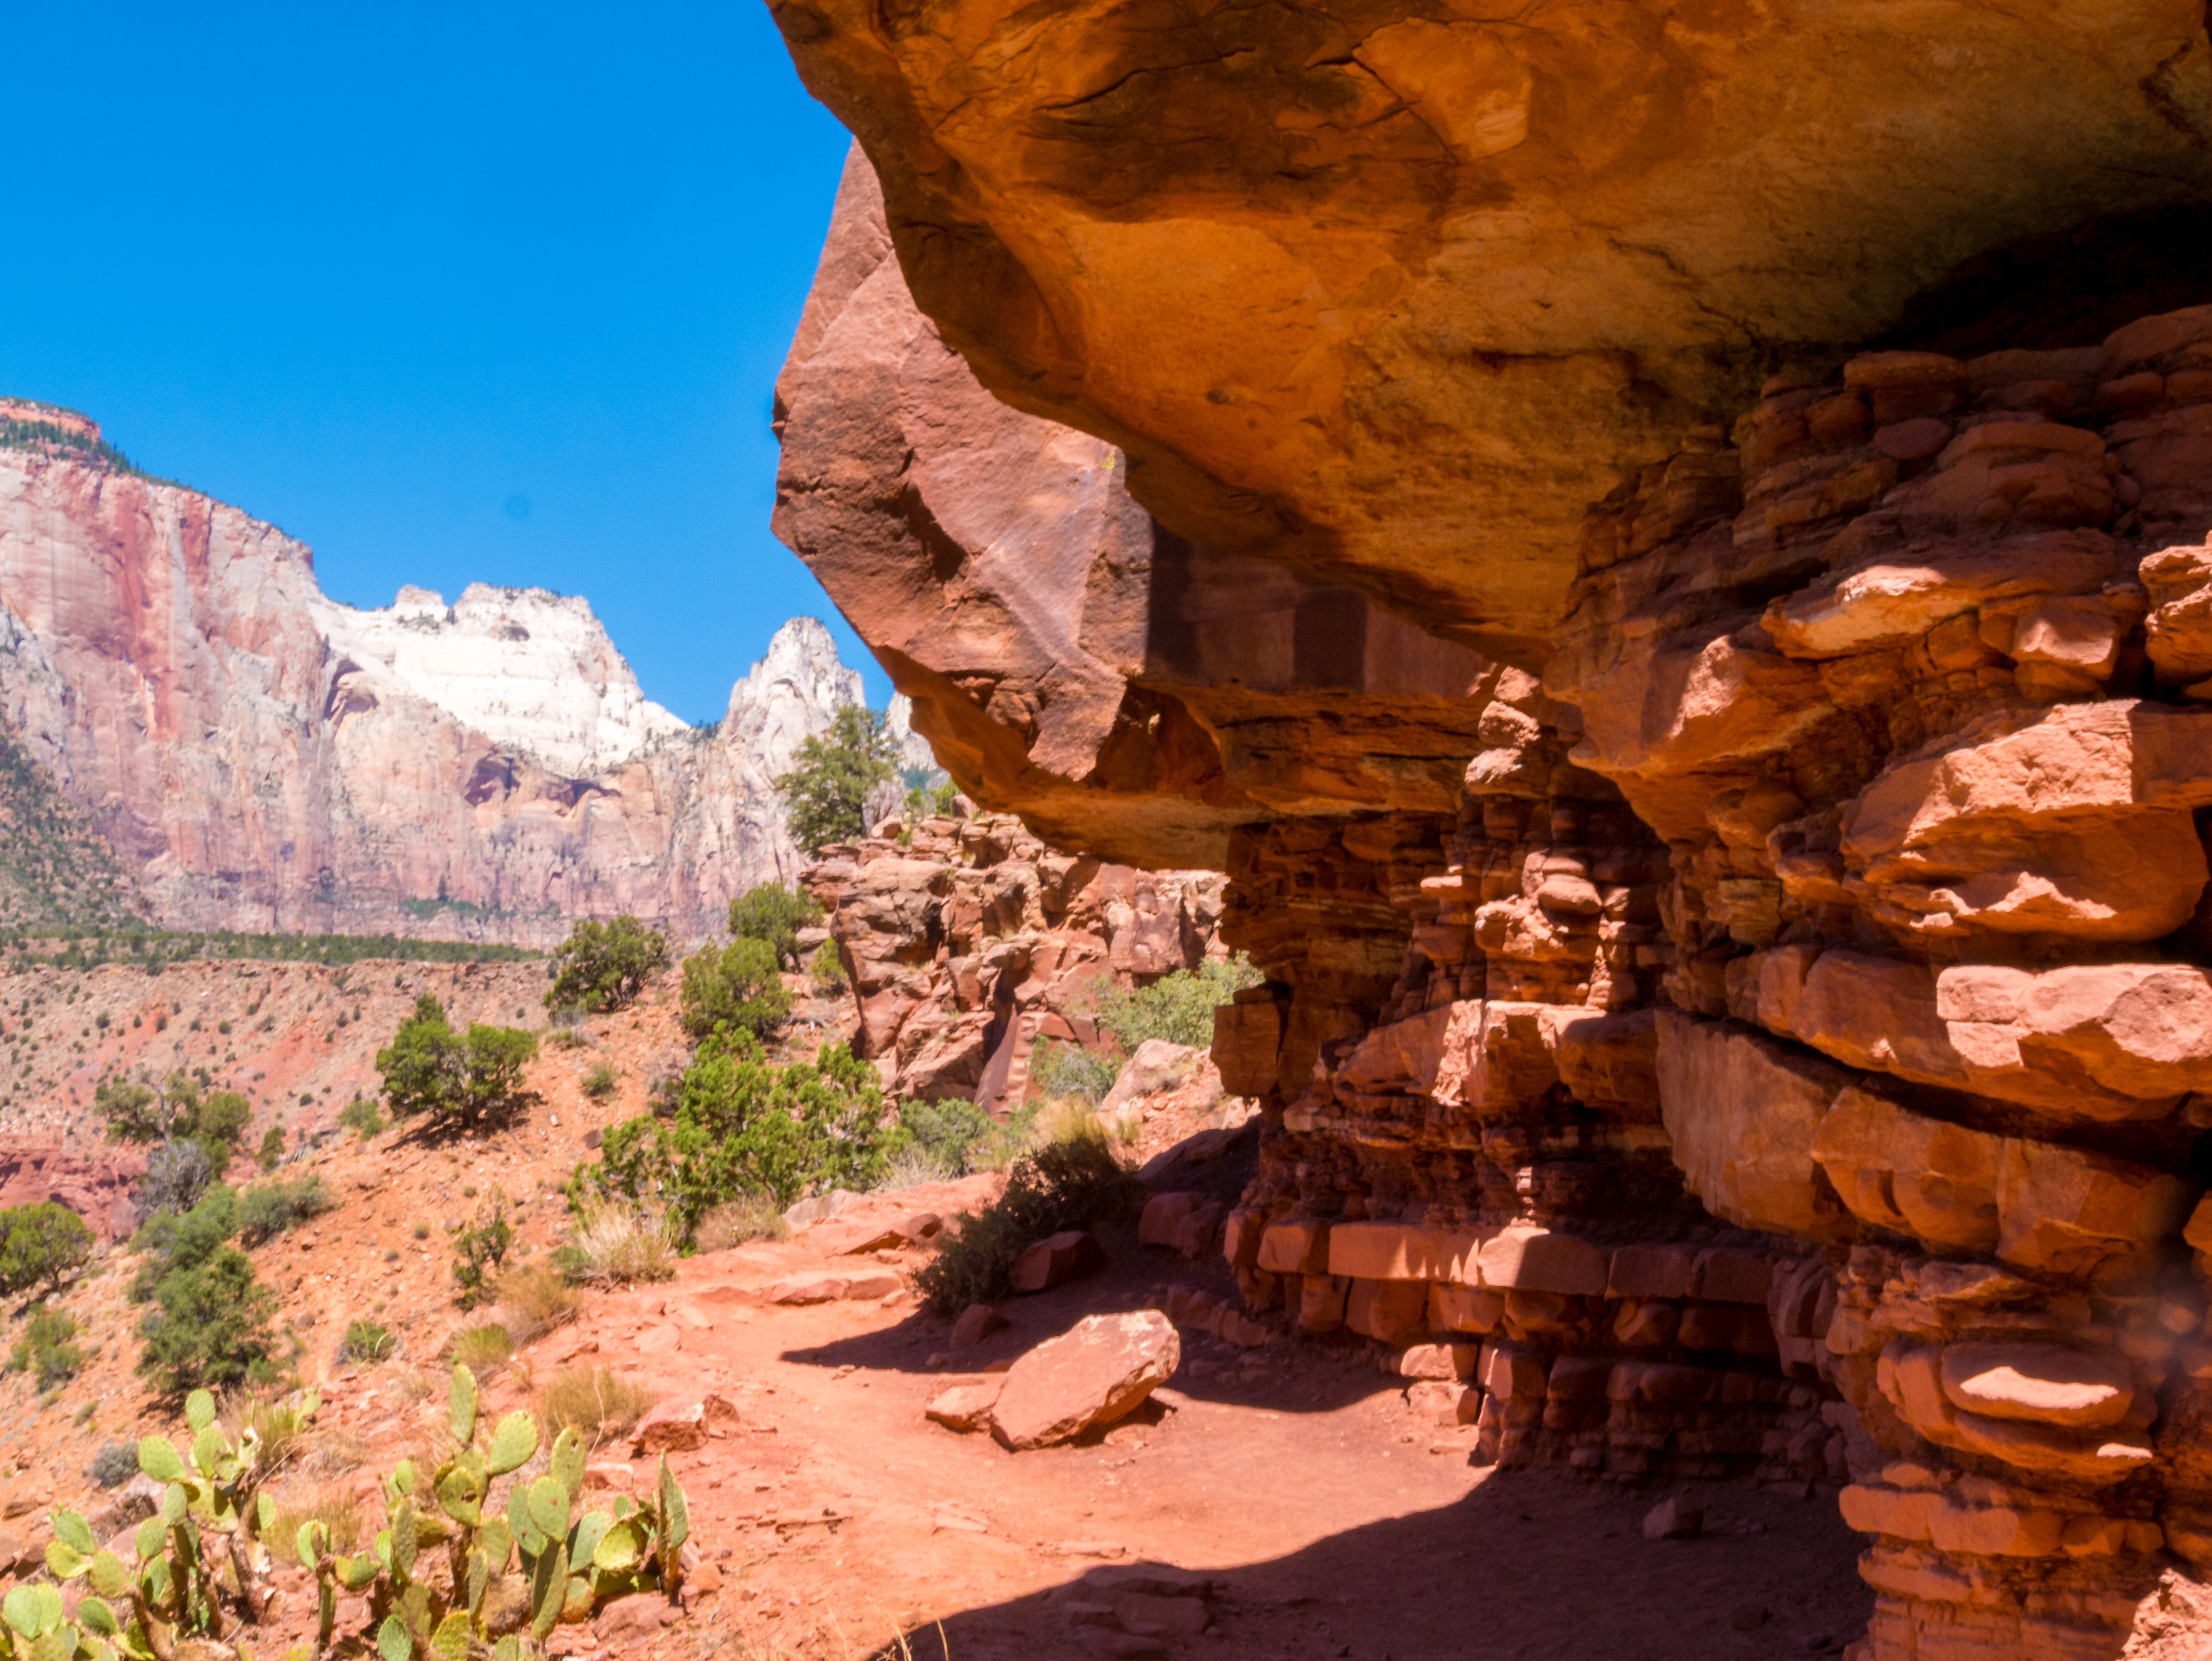 An shady overhang on the Watchman Trail at Zion National Park